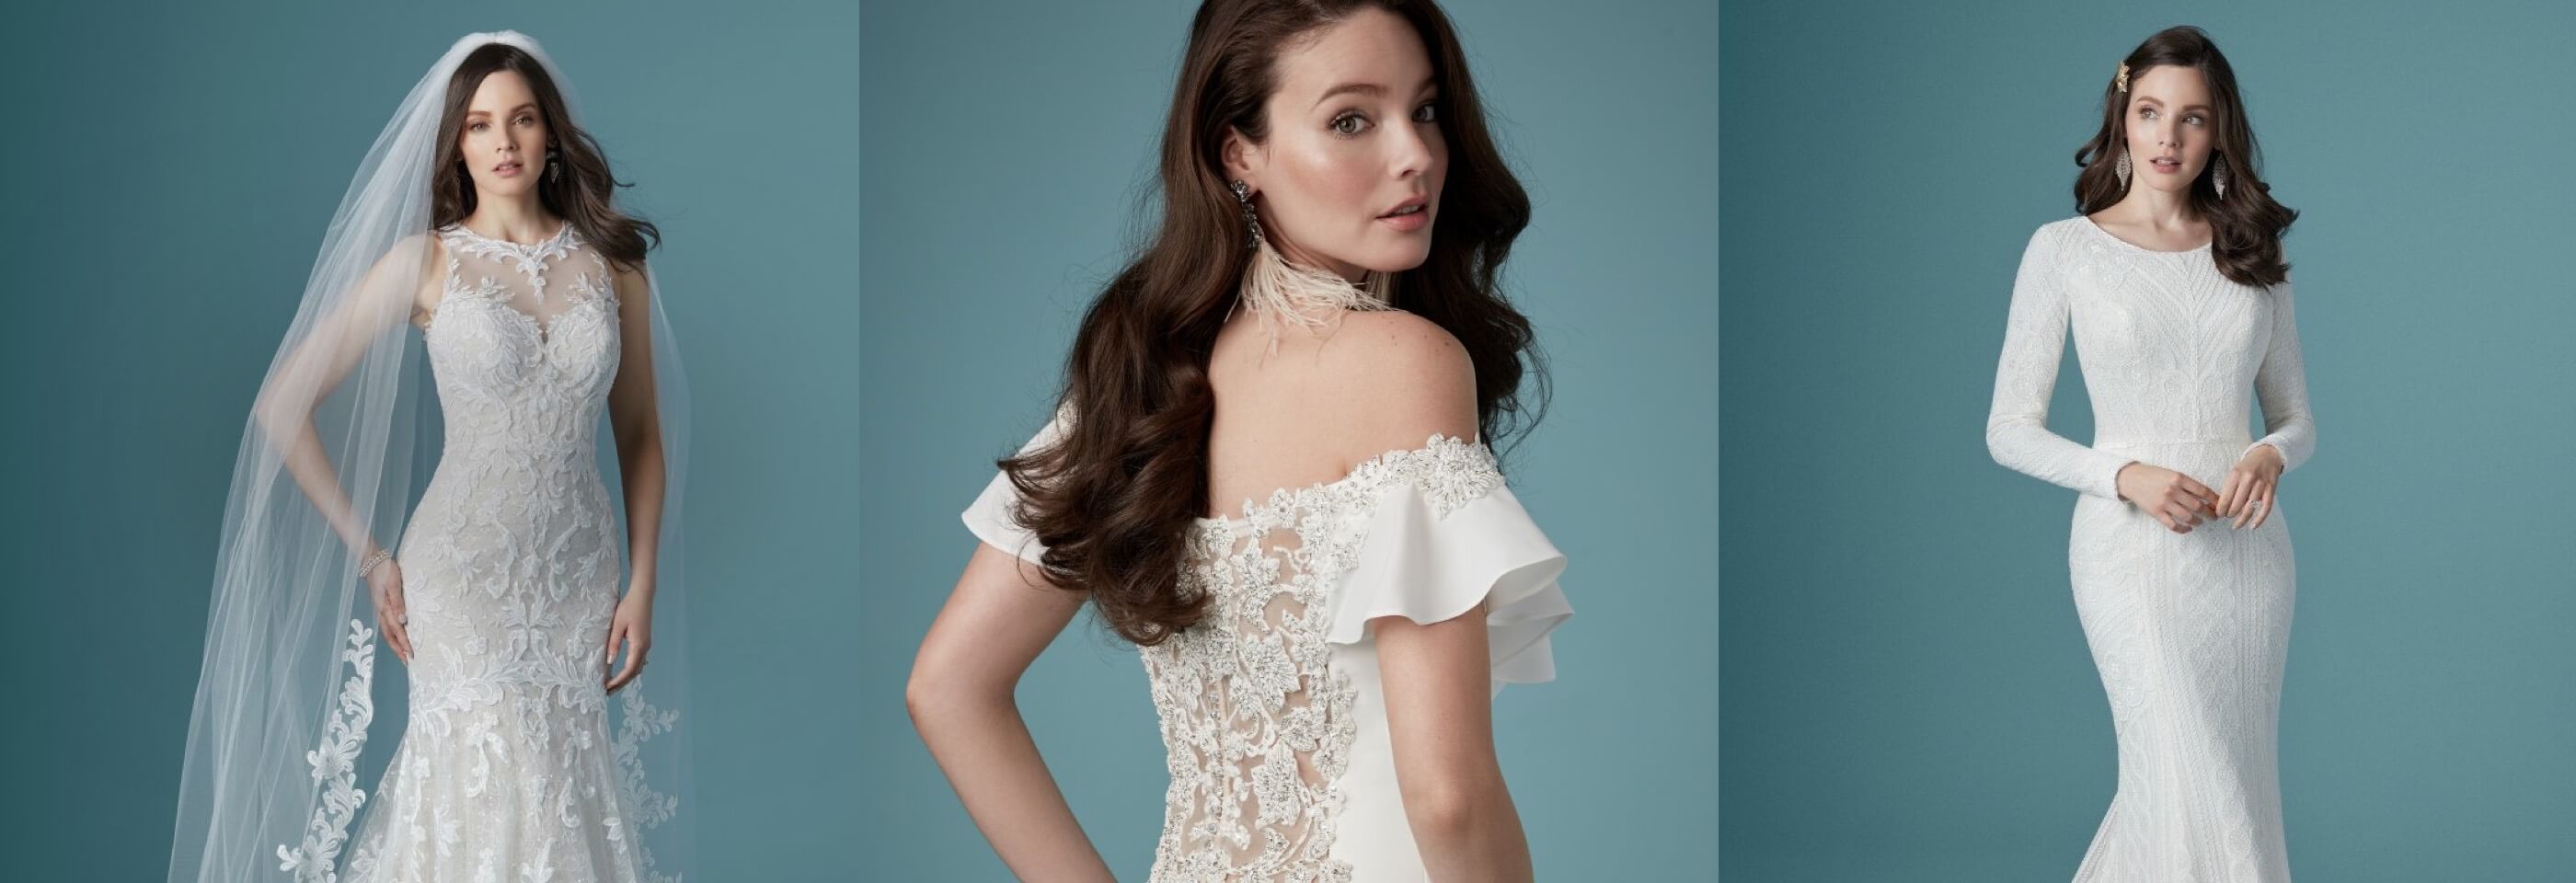 Model wearing white gowns from different bridal collections